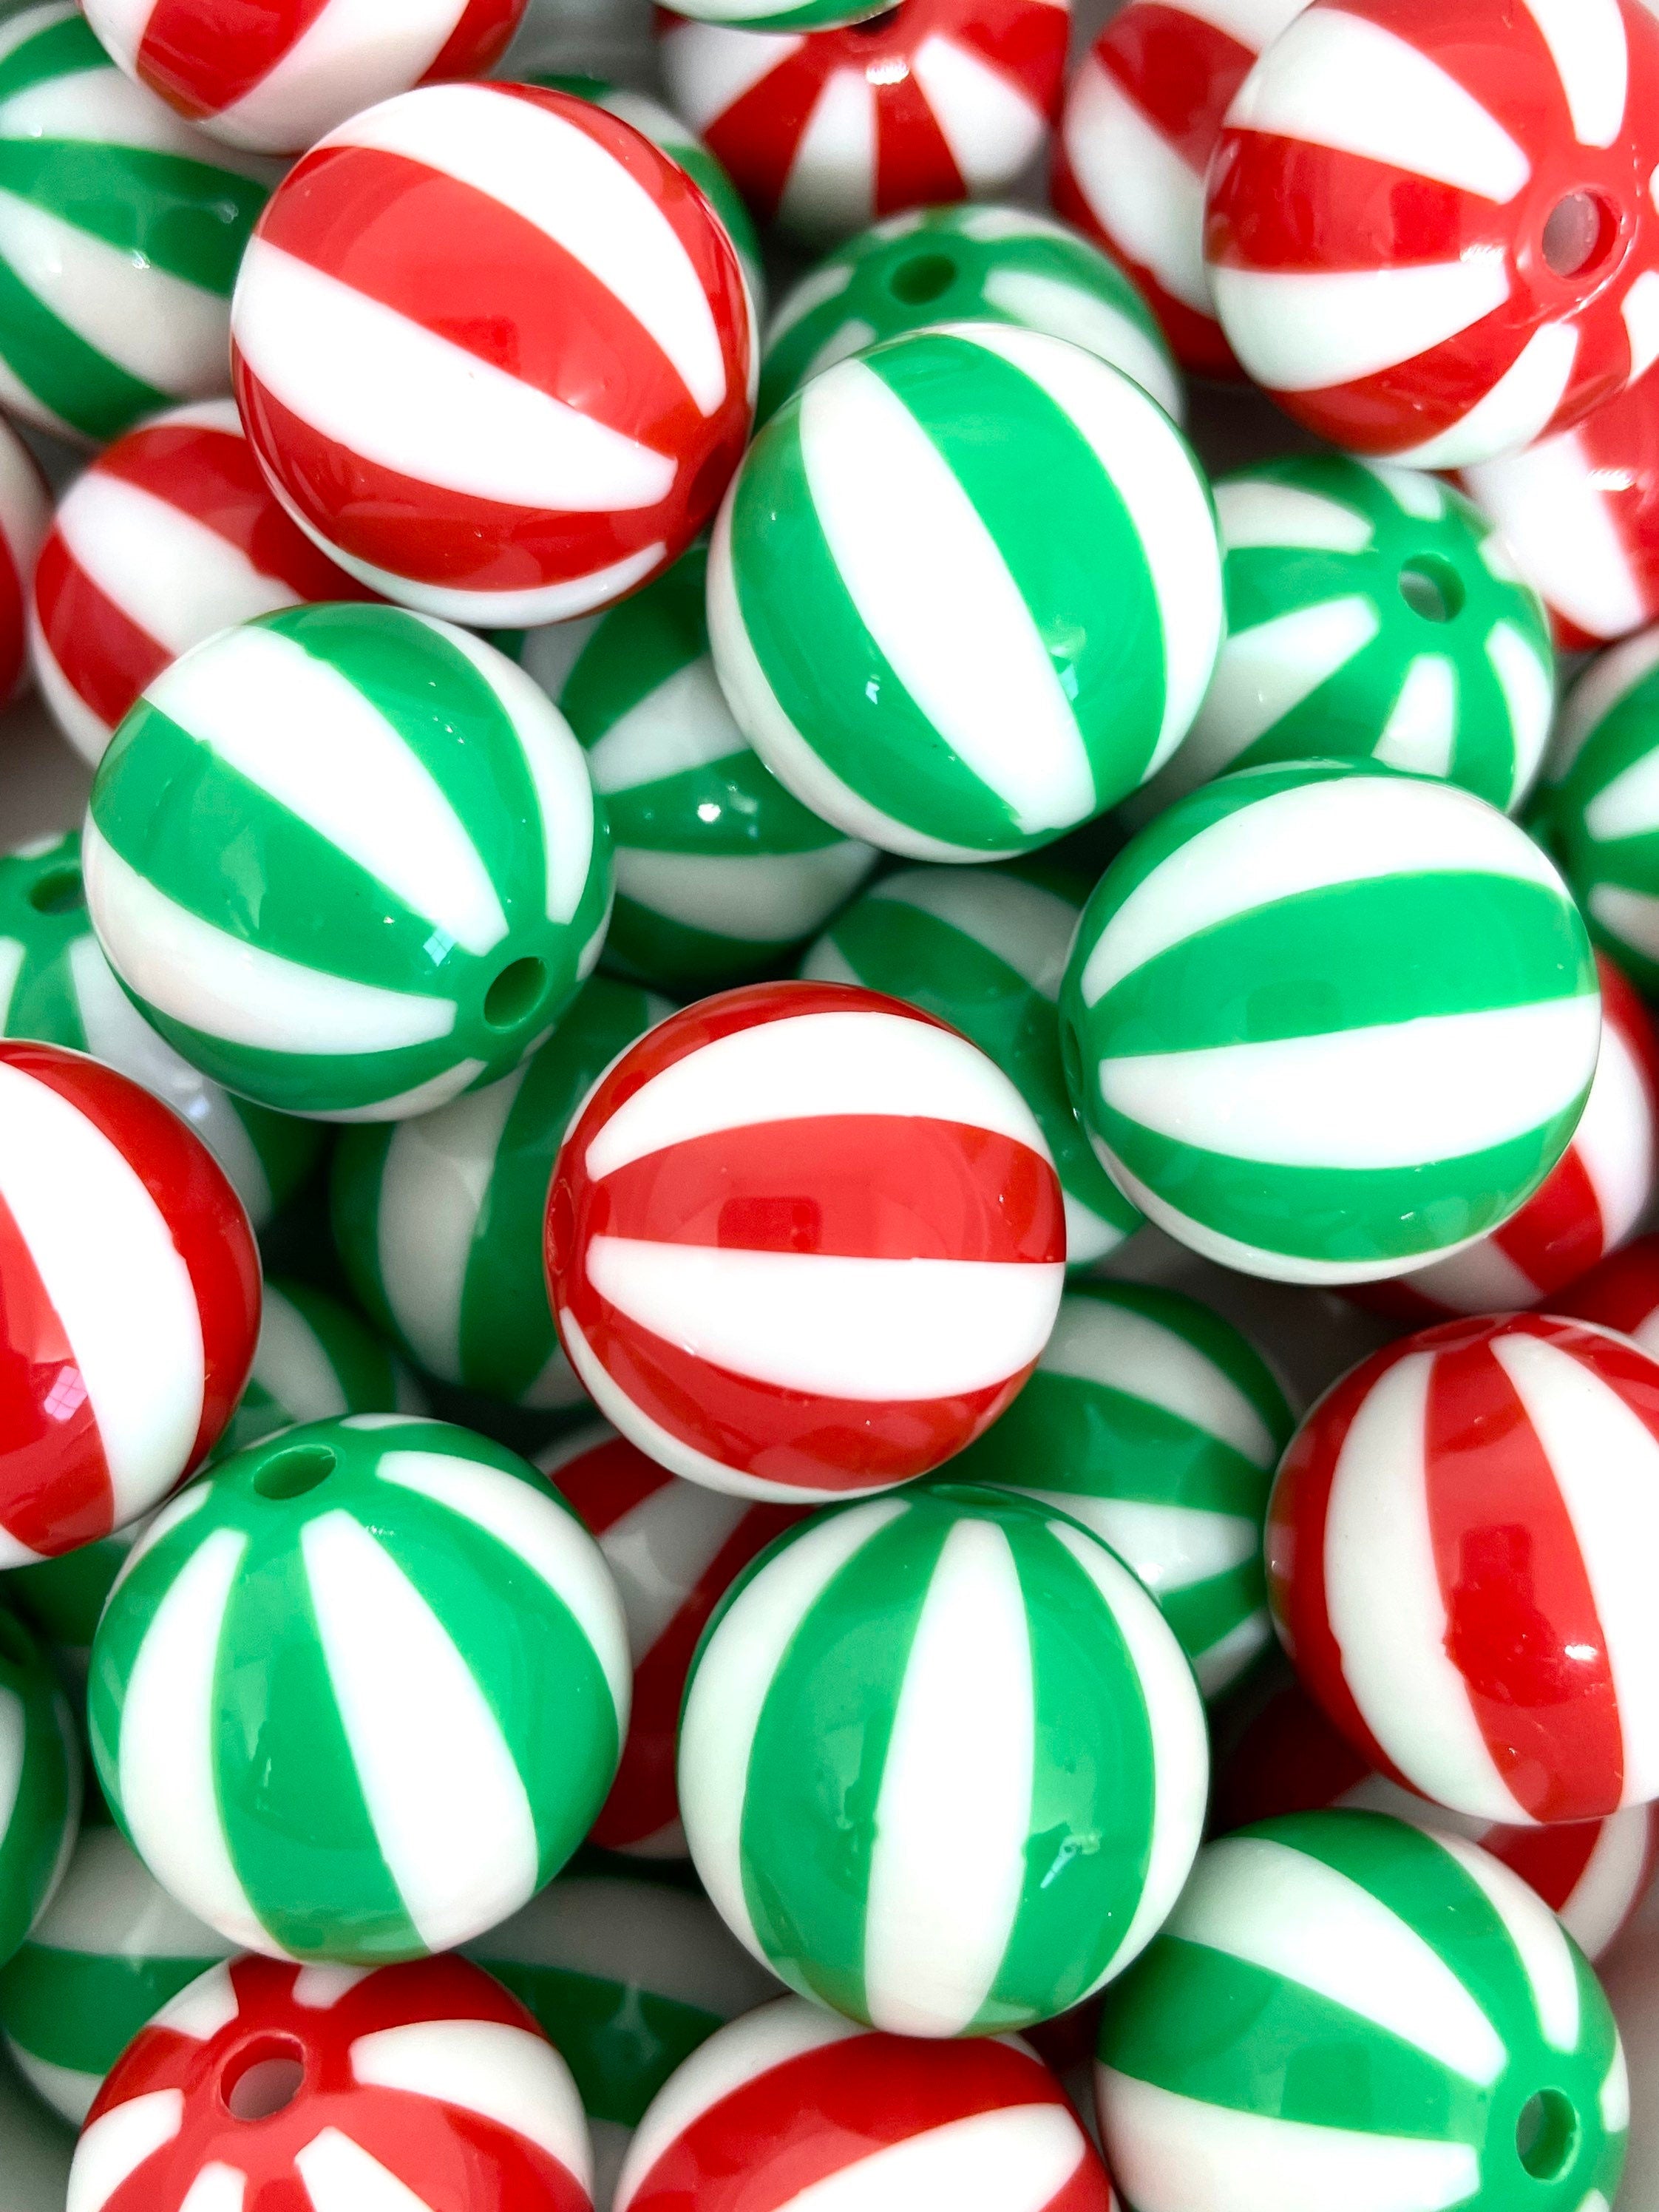 Chunky Christmas Beads for Necklace, Peppermint Beads, 20mm Bead Mix for Christmas, Chunky Christmas Beads for the Holidays, Striped Beads